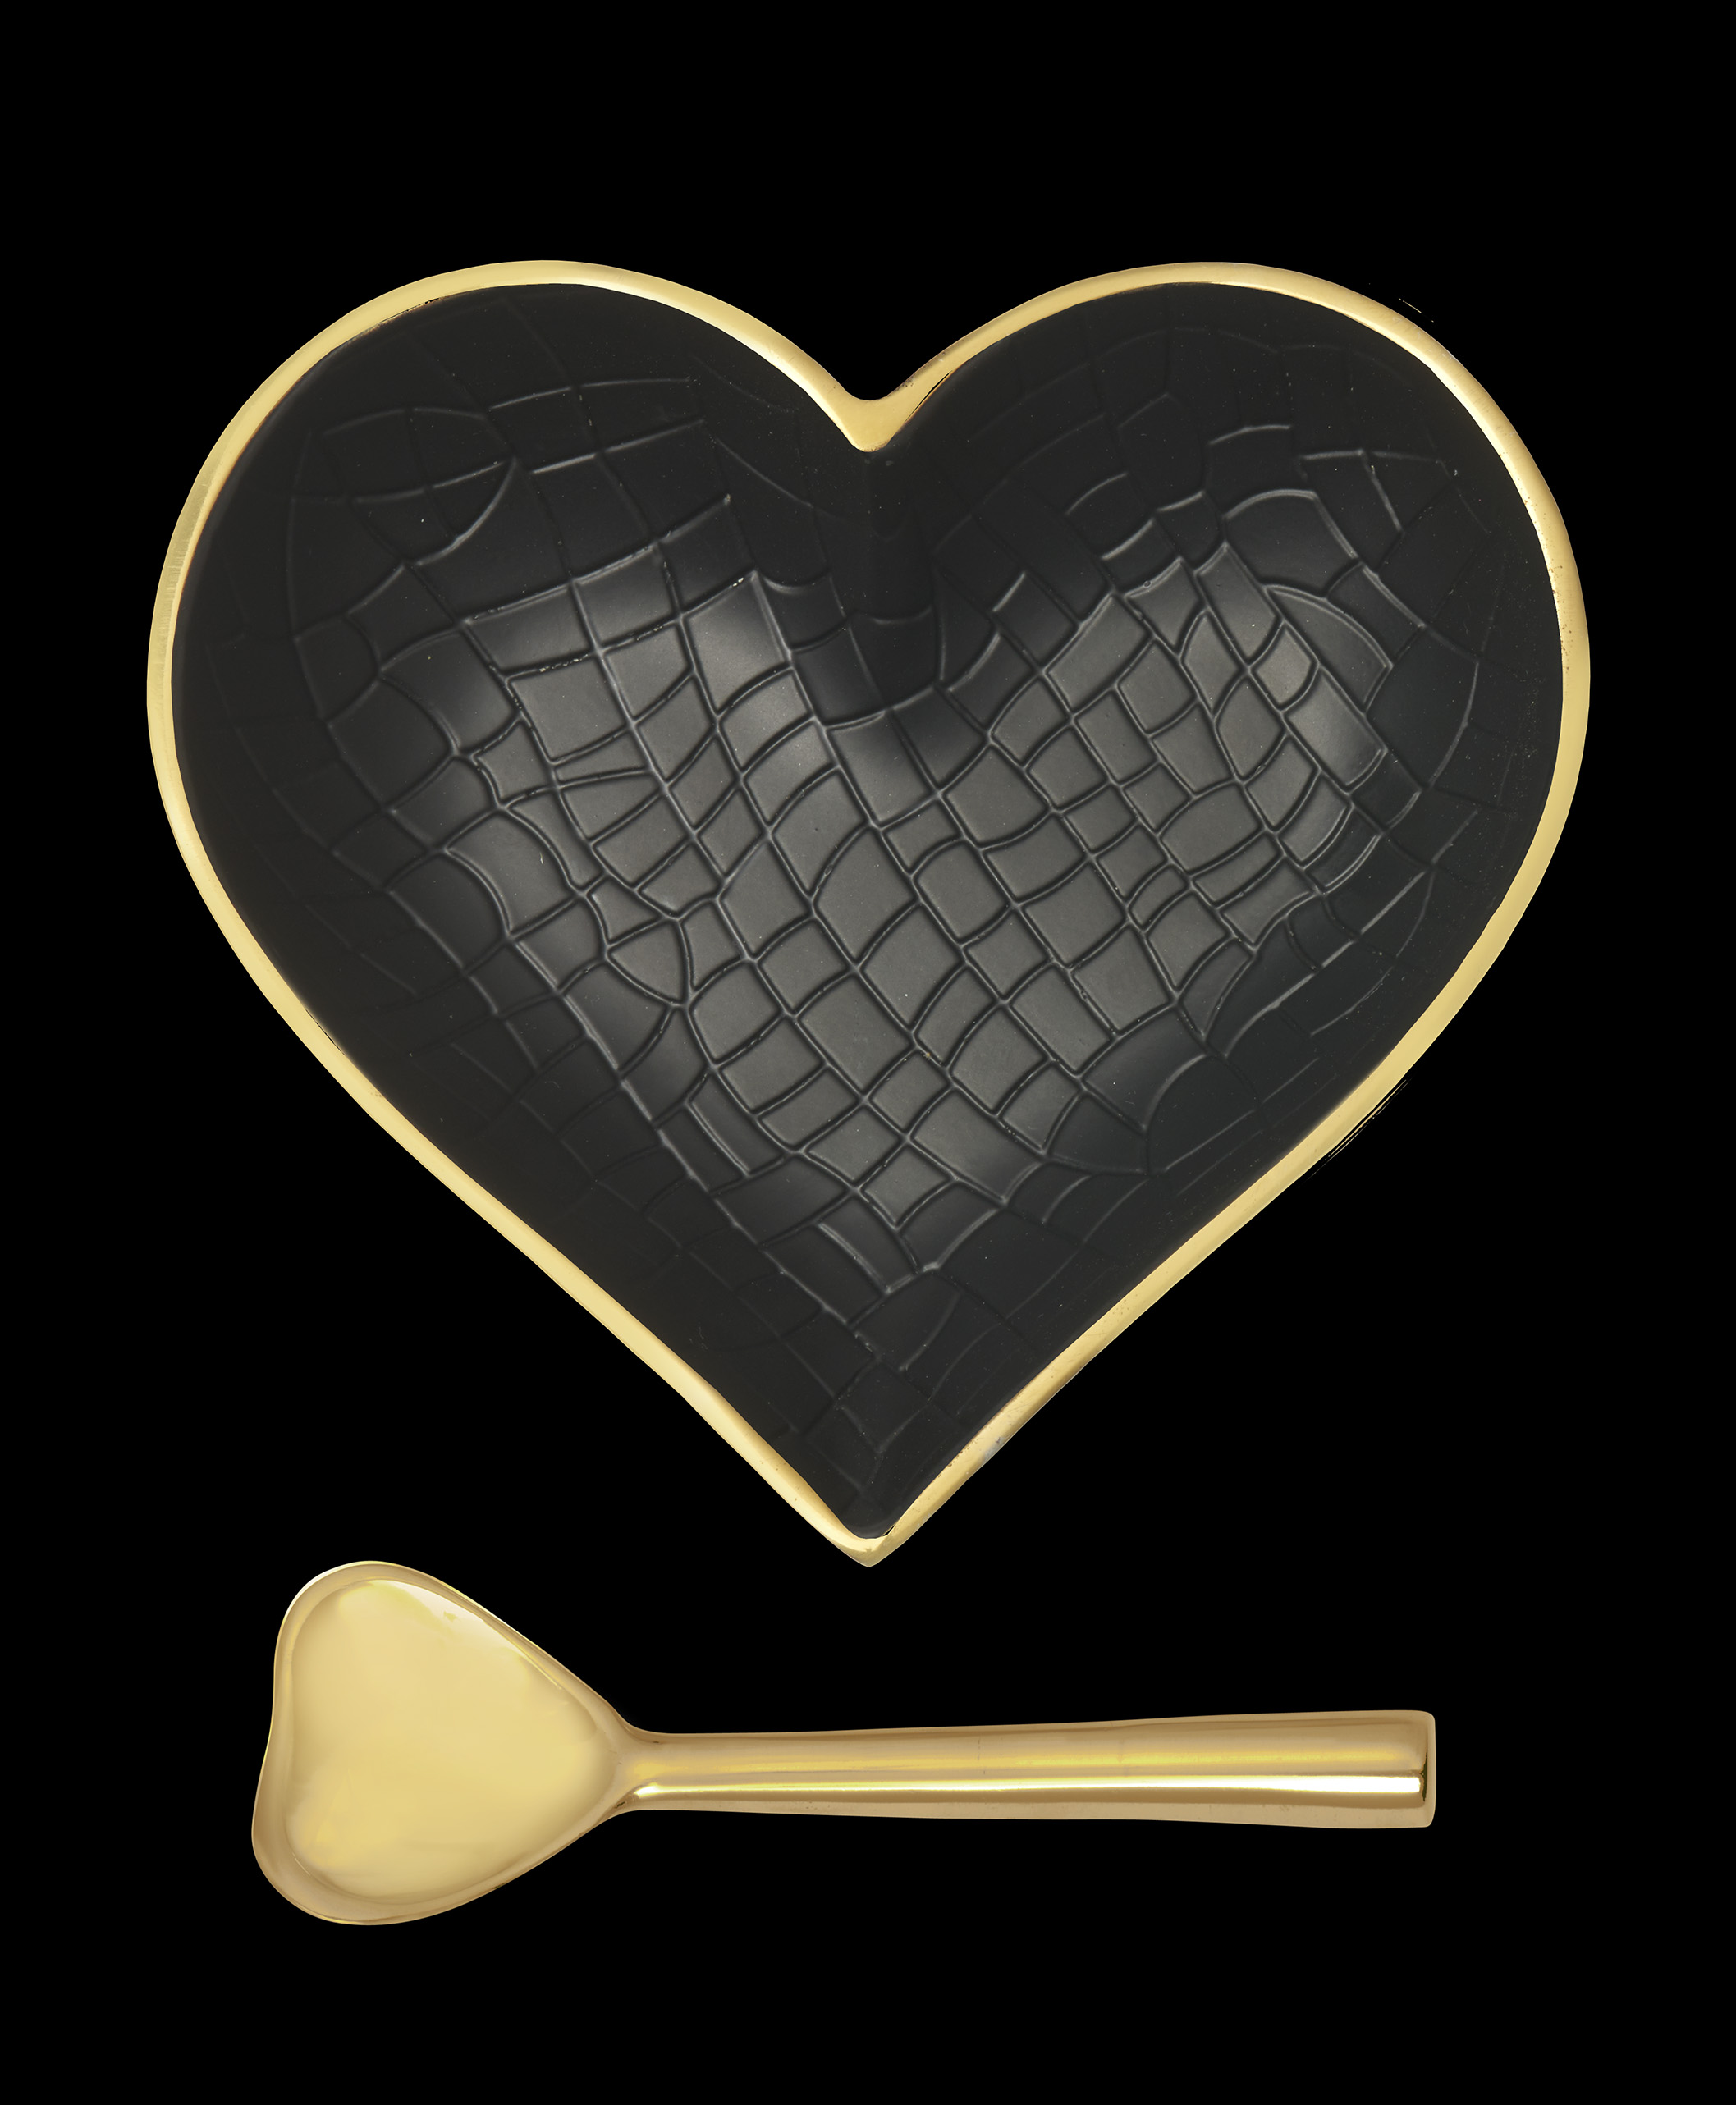 Happy Gold & Black Croco Heart with Gold Heart Spoon